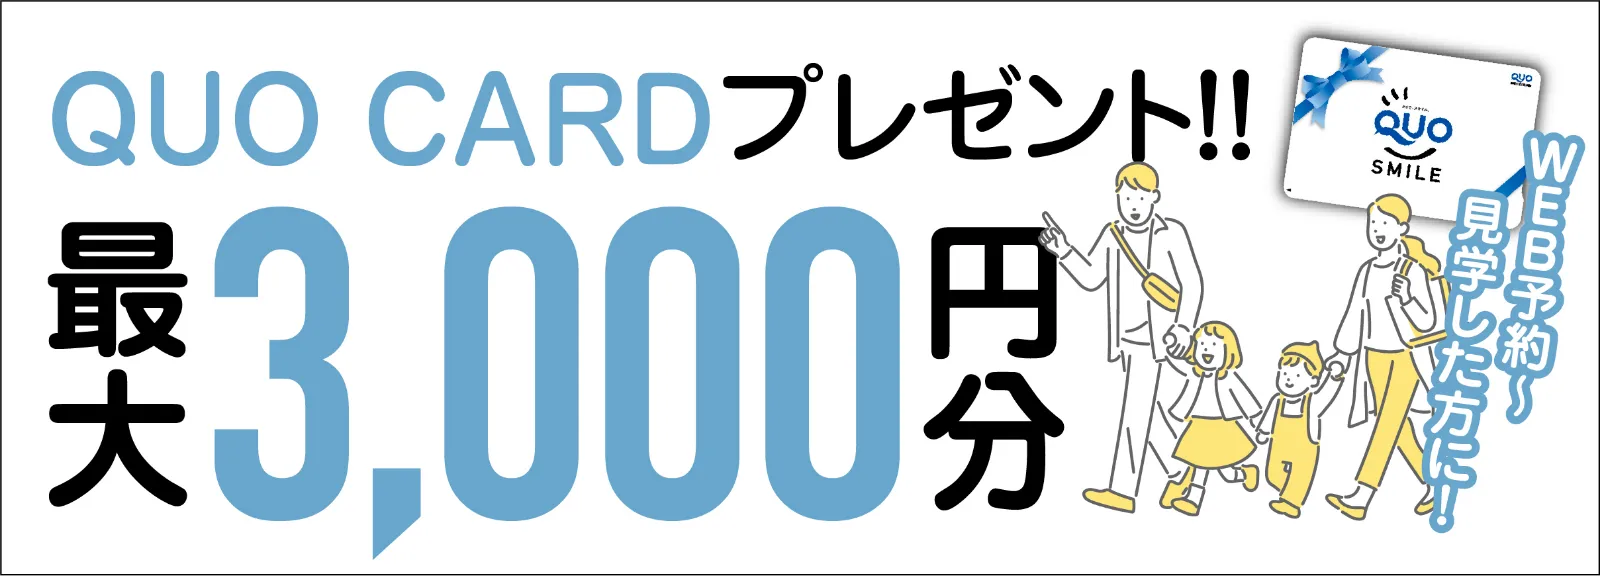 Web予約→見学した方に！最大3,000円分 QUO CARD プレゼント！！